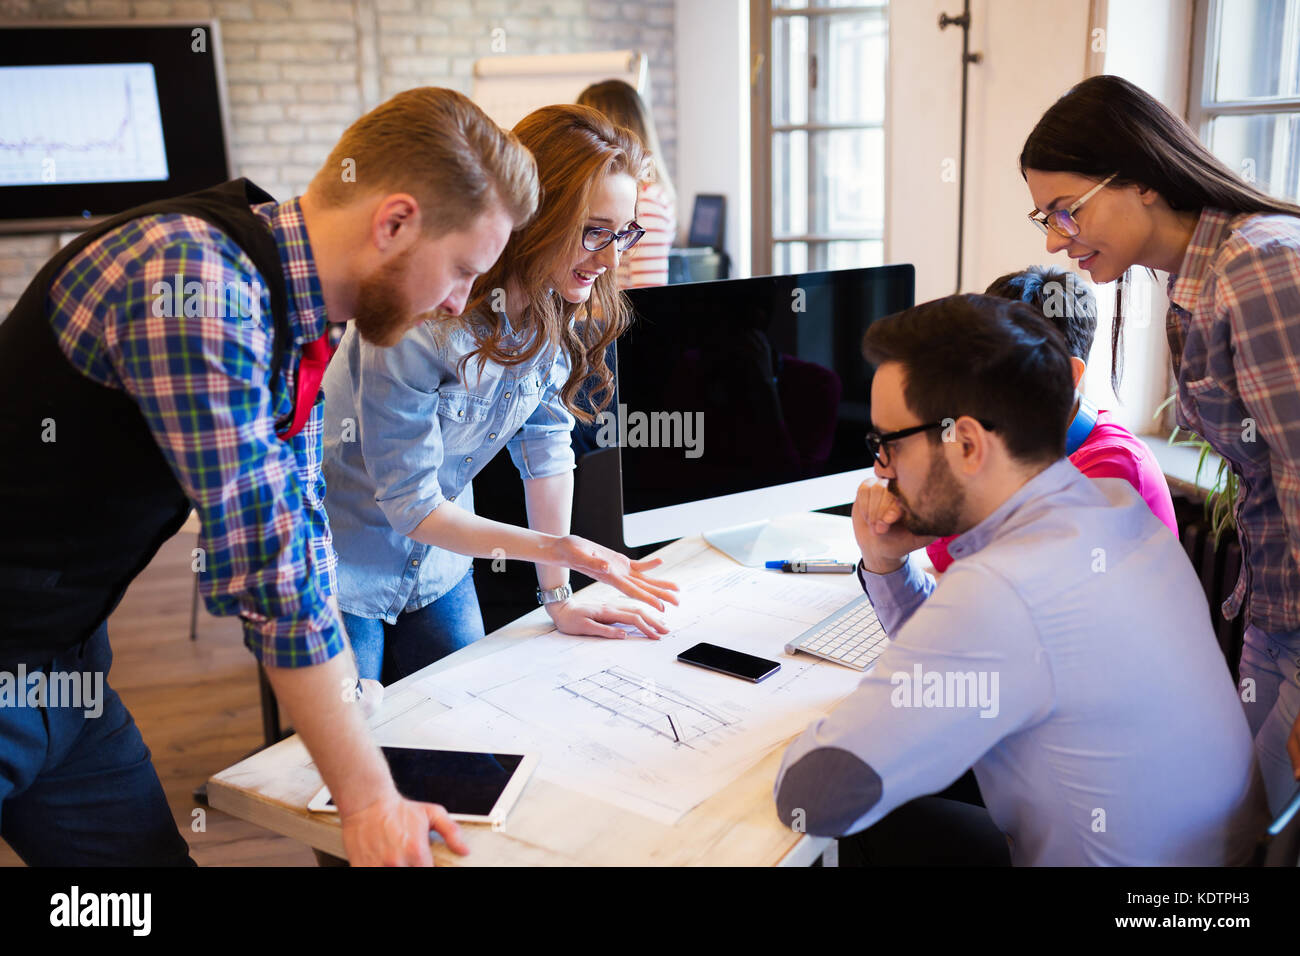 Startup Teamwork Brainstorming Meeting concept in office Stock Photo